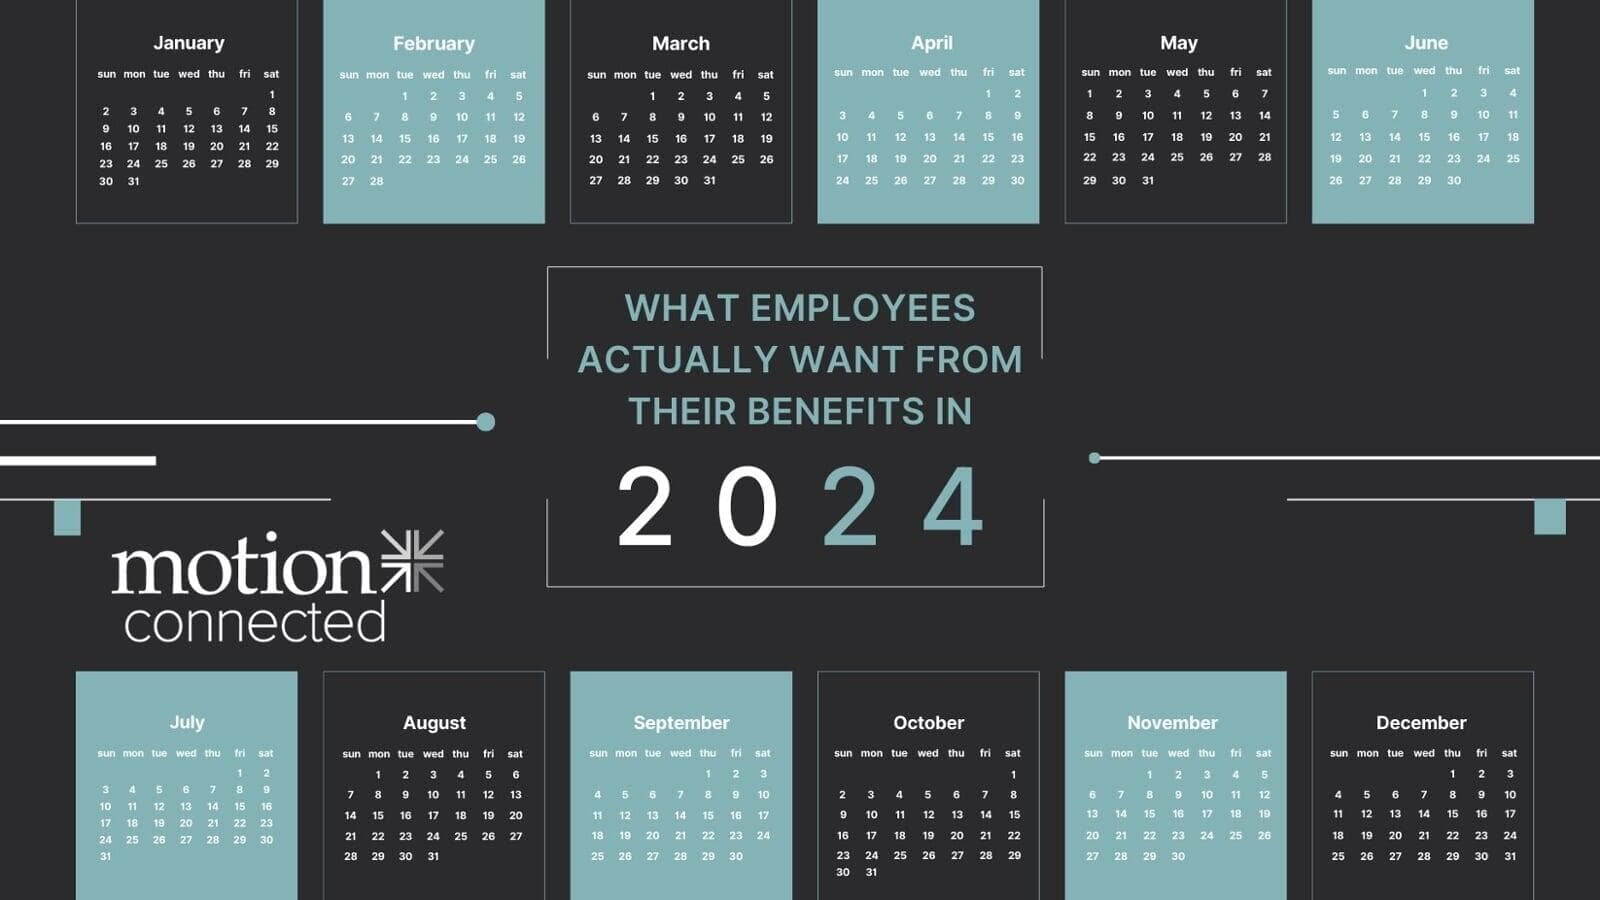 What Employees Actually Want from Their Benefits in 2024